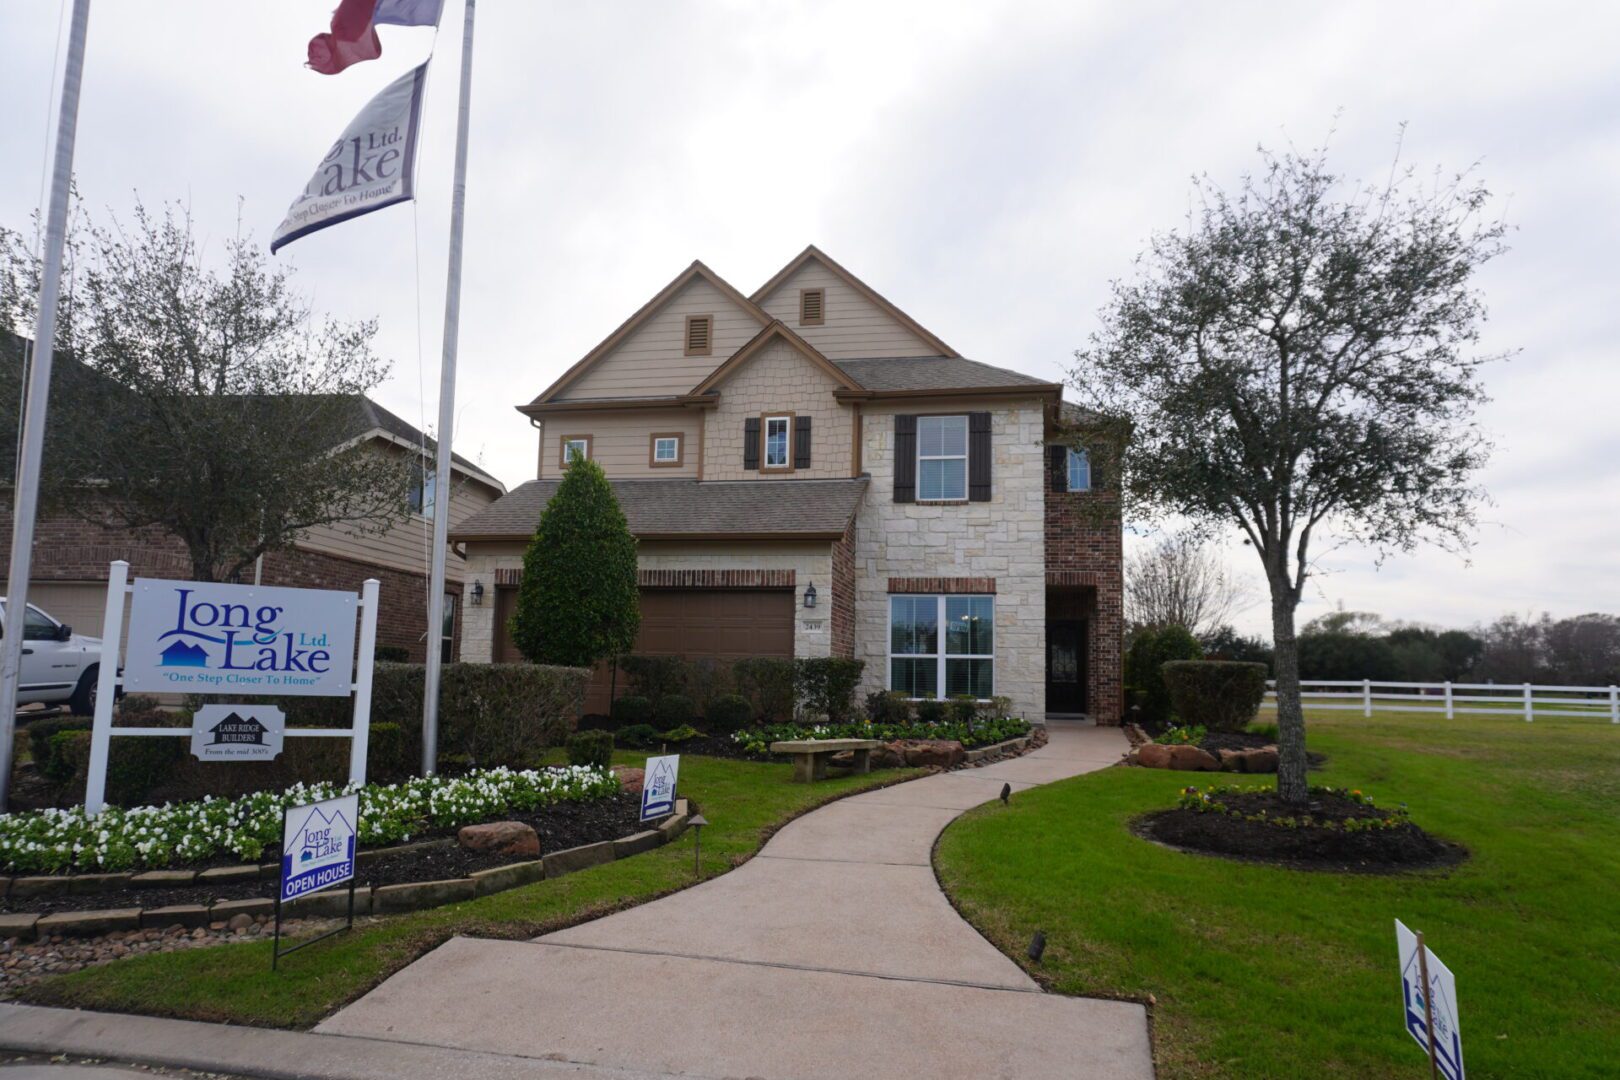 A two-story house with a brick and siding exterior, lawn with white flowers, under a cloudy sky, displaying multiple "Texas builders" real estate signs.